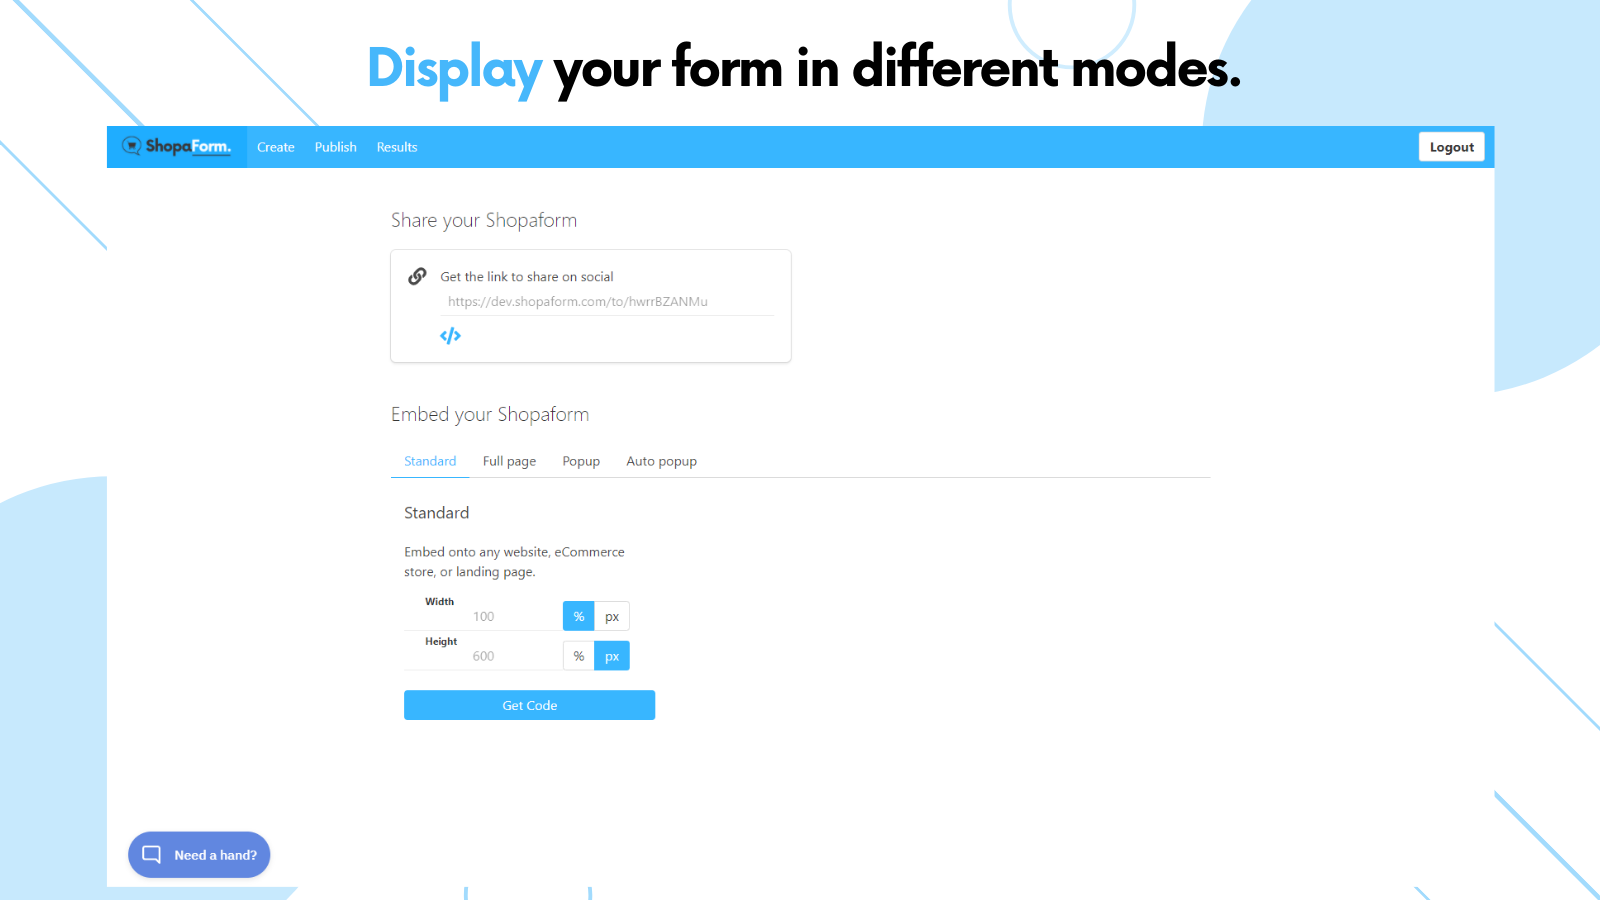 Shopaform Display Mode - Product Recommendation Quiz